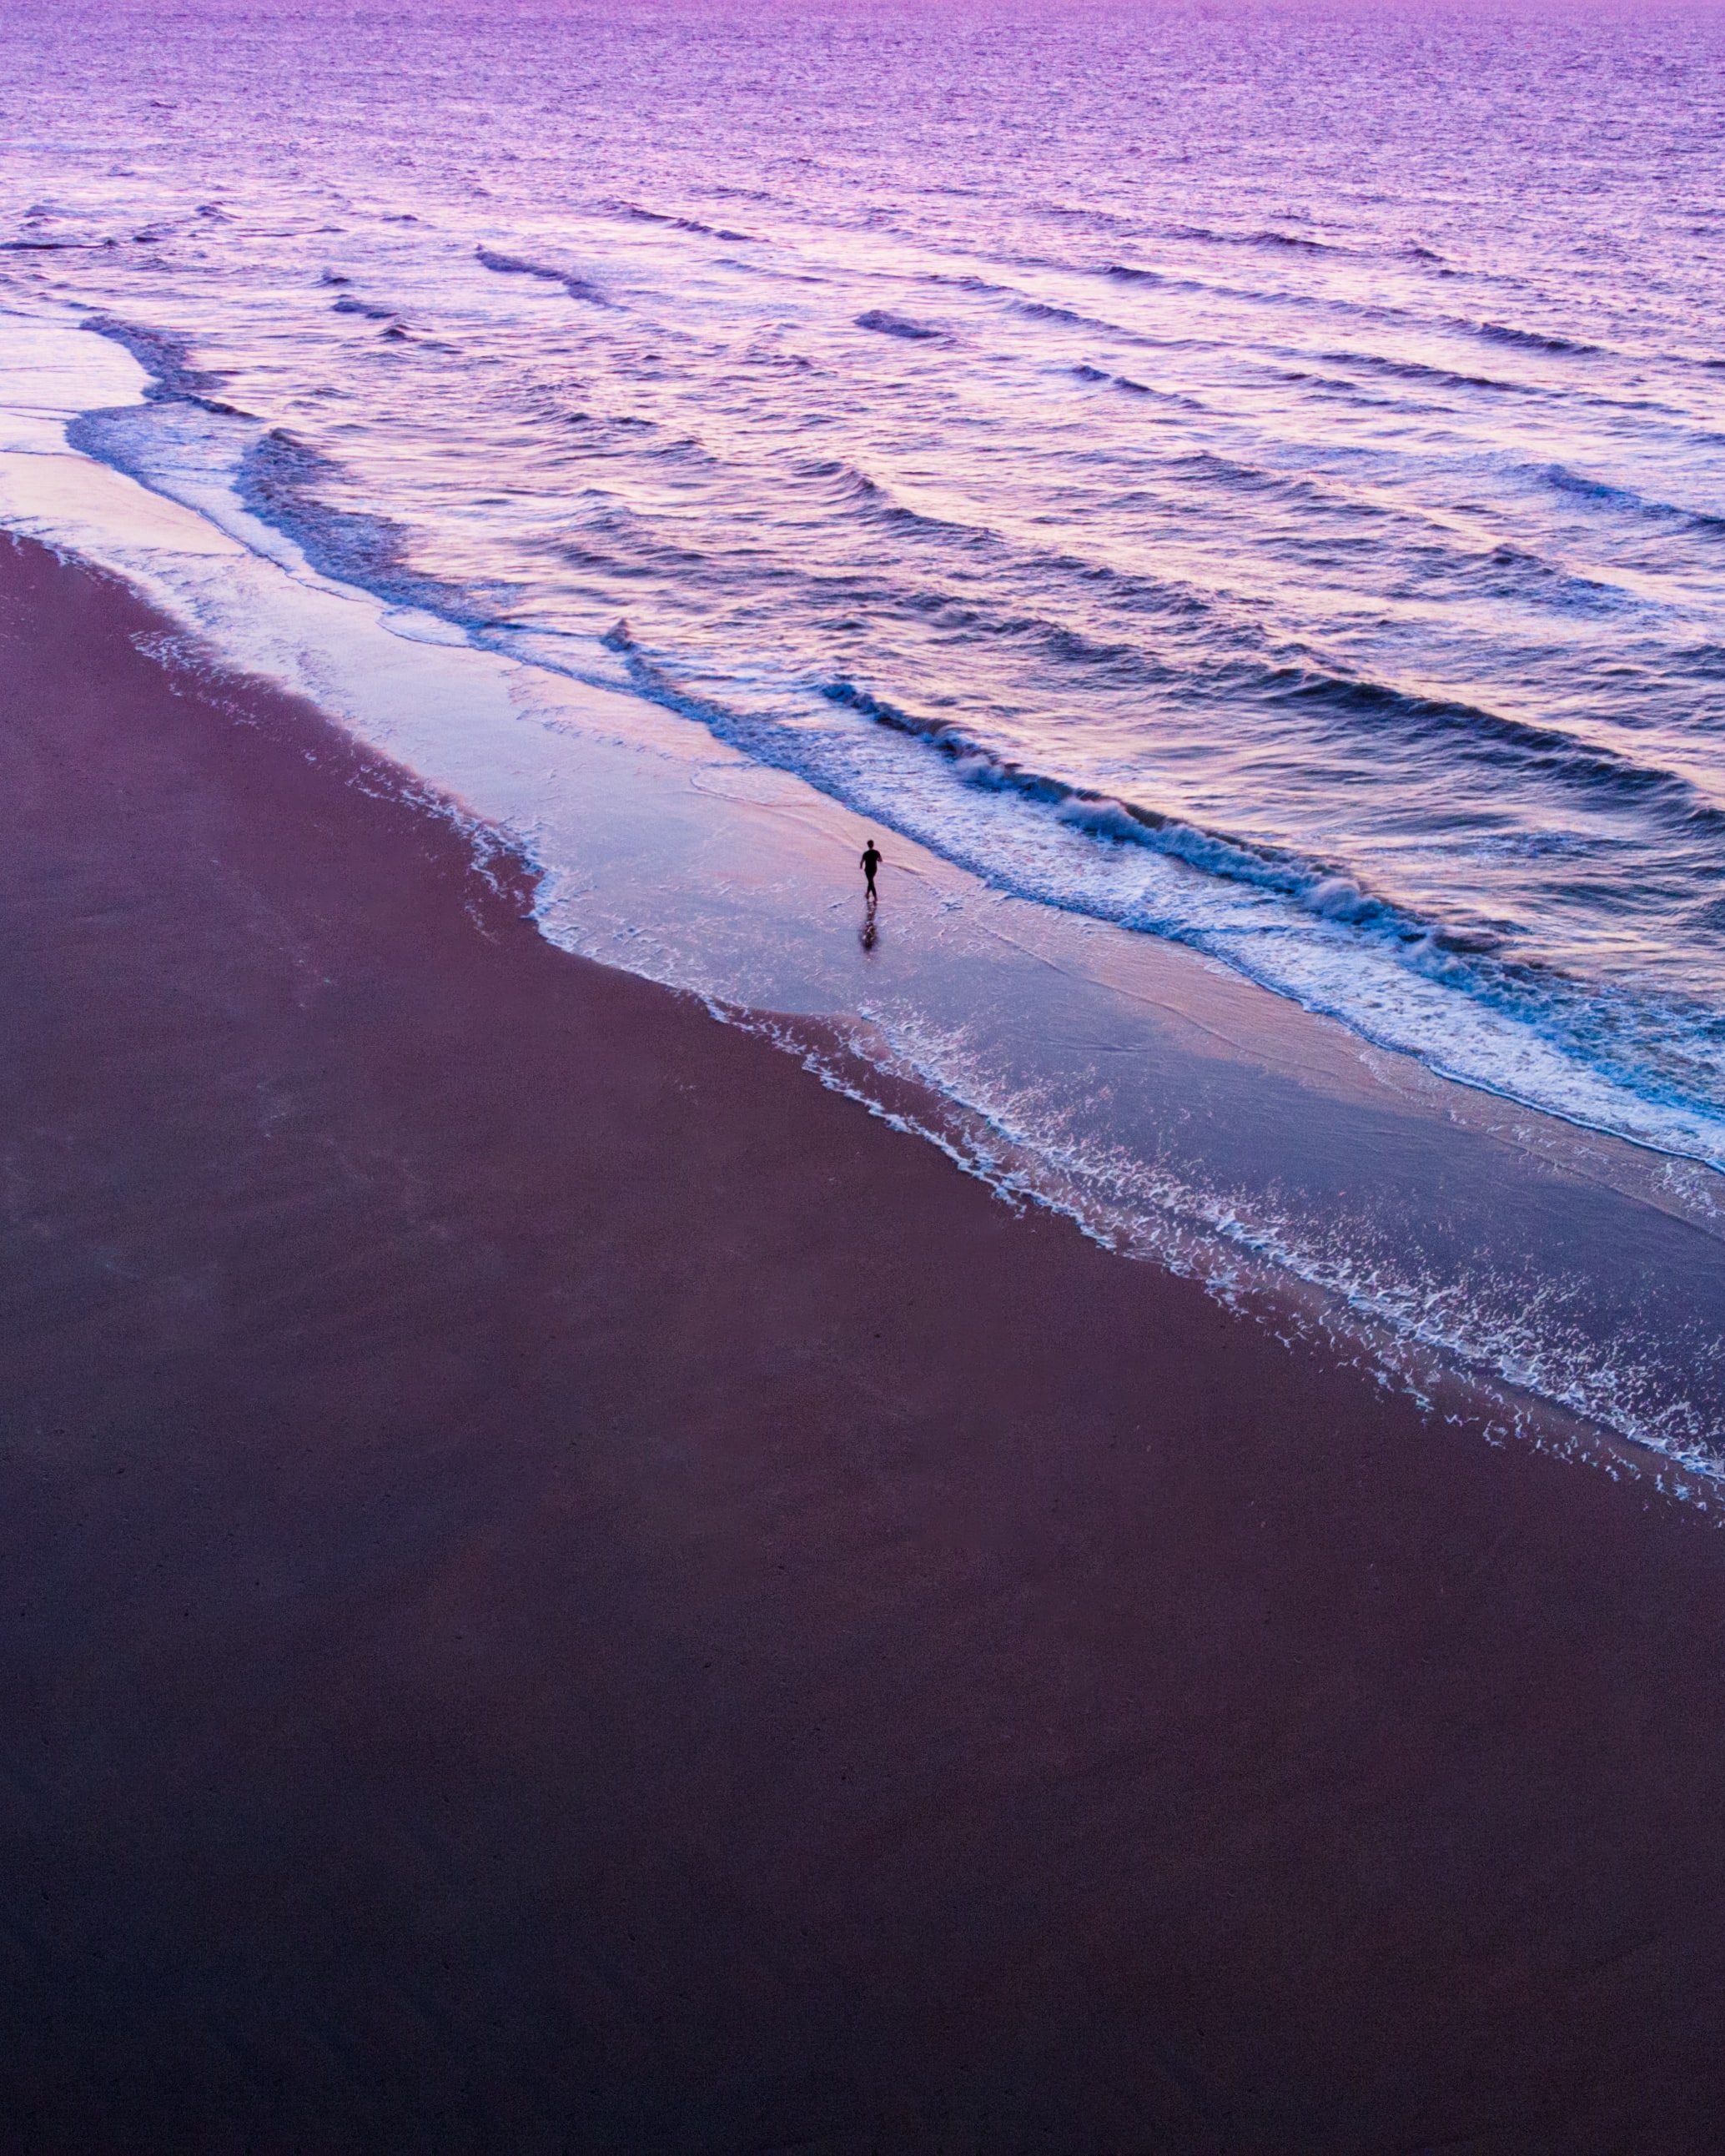 purple, sea, beach, violet, view from above, silhouette, miscellanea, miscellaneous, human, person, loneliness